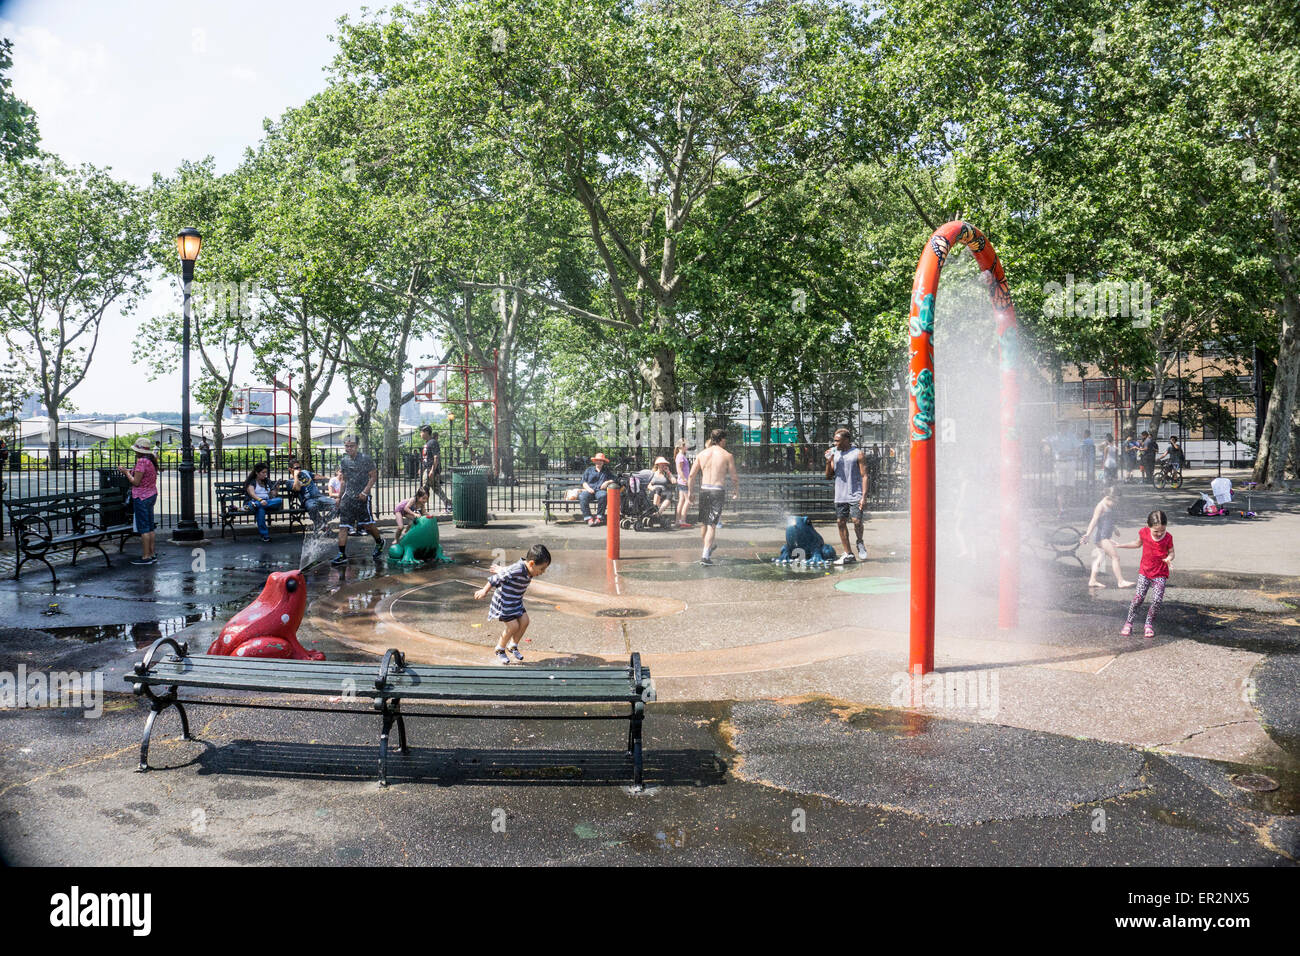 New York City Monday May 25 2015, USA; on a hot Memorial Day grownups watch & kids stay cool runnig under an arch spraying fine veil of water Credit:  Dorothy Alexander/Alamy Live News Stock Photo